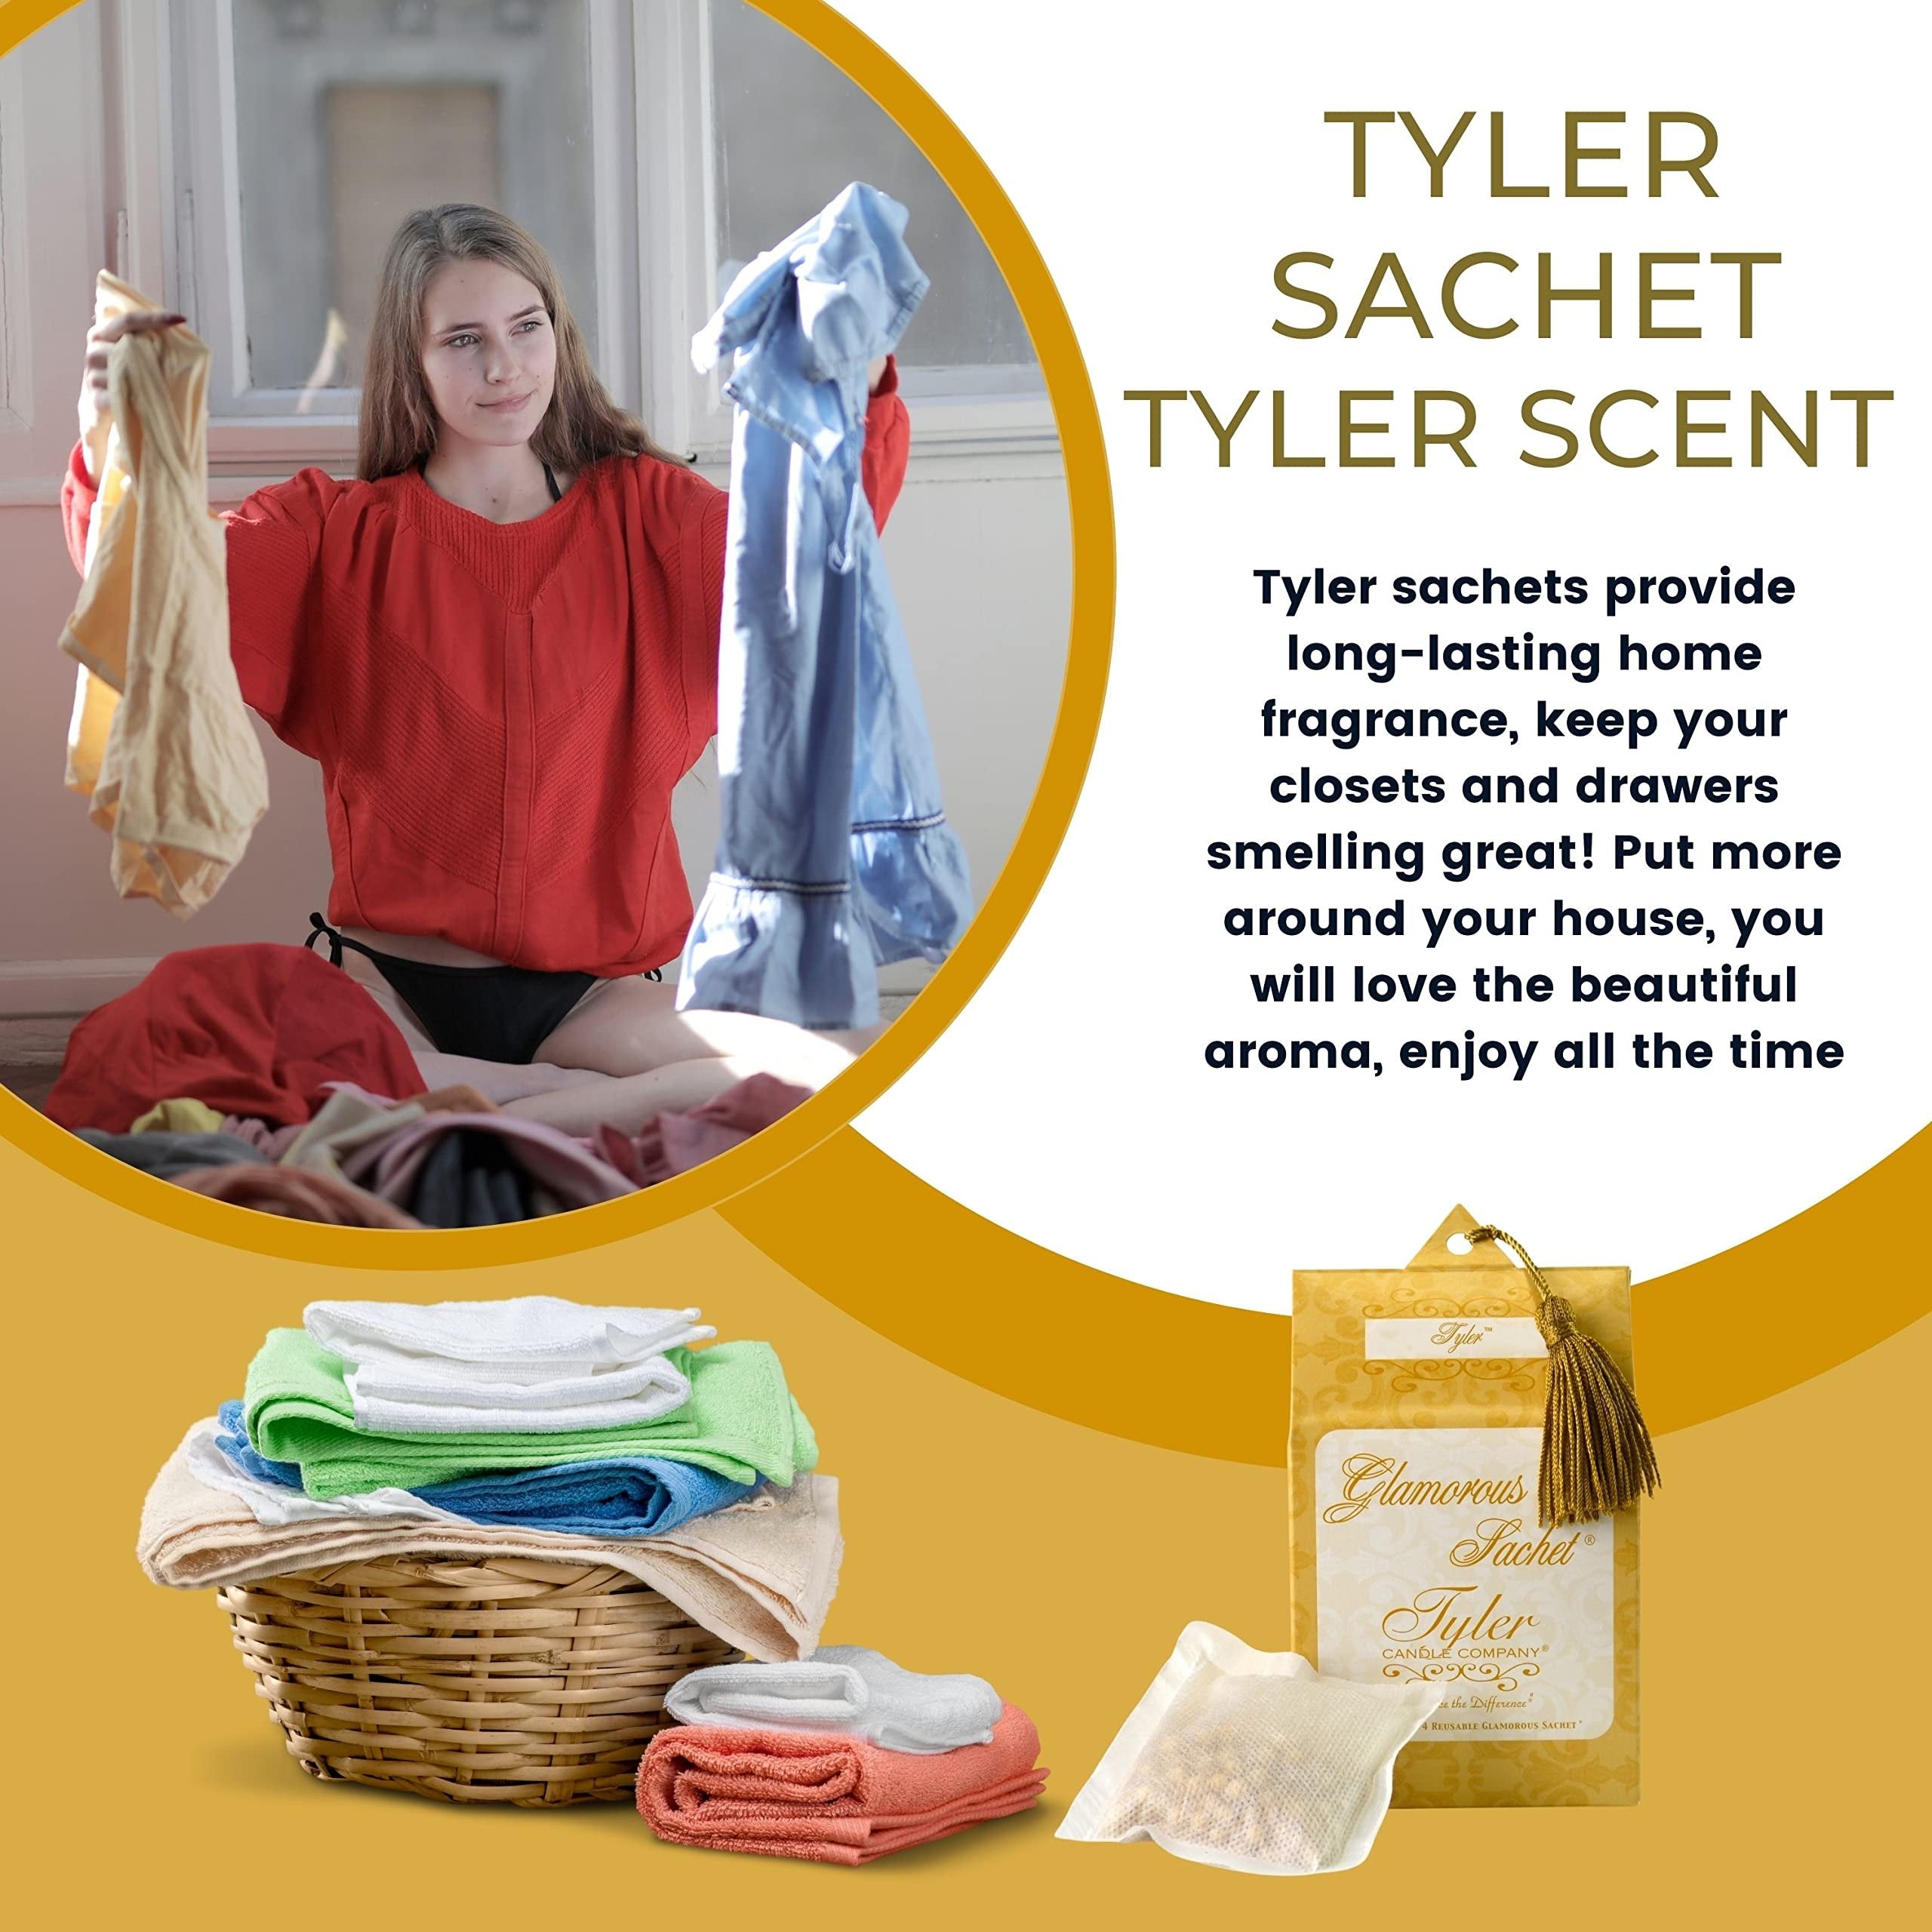 Tyler Candle Company Tyler Scent Dryer Sheet Sachets - Glamorous Reusable Dryer Sheets - Sachets for Drawers and Closets - 2 Pack of 4 Sachets, Dryer, Home, or Personal Sachet, with Bonus Key Chain